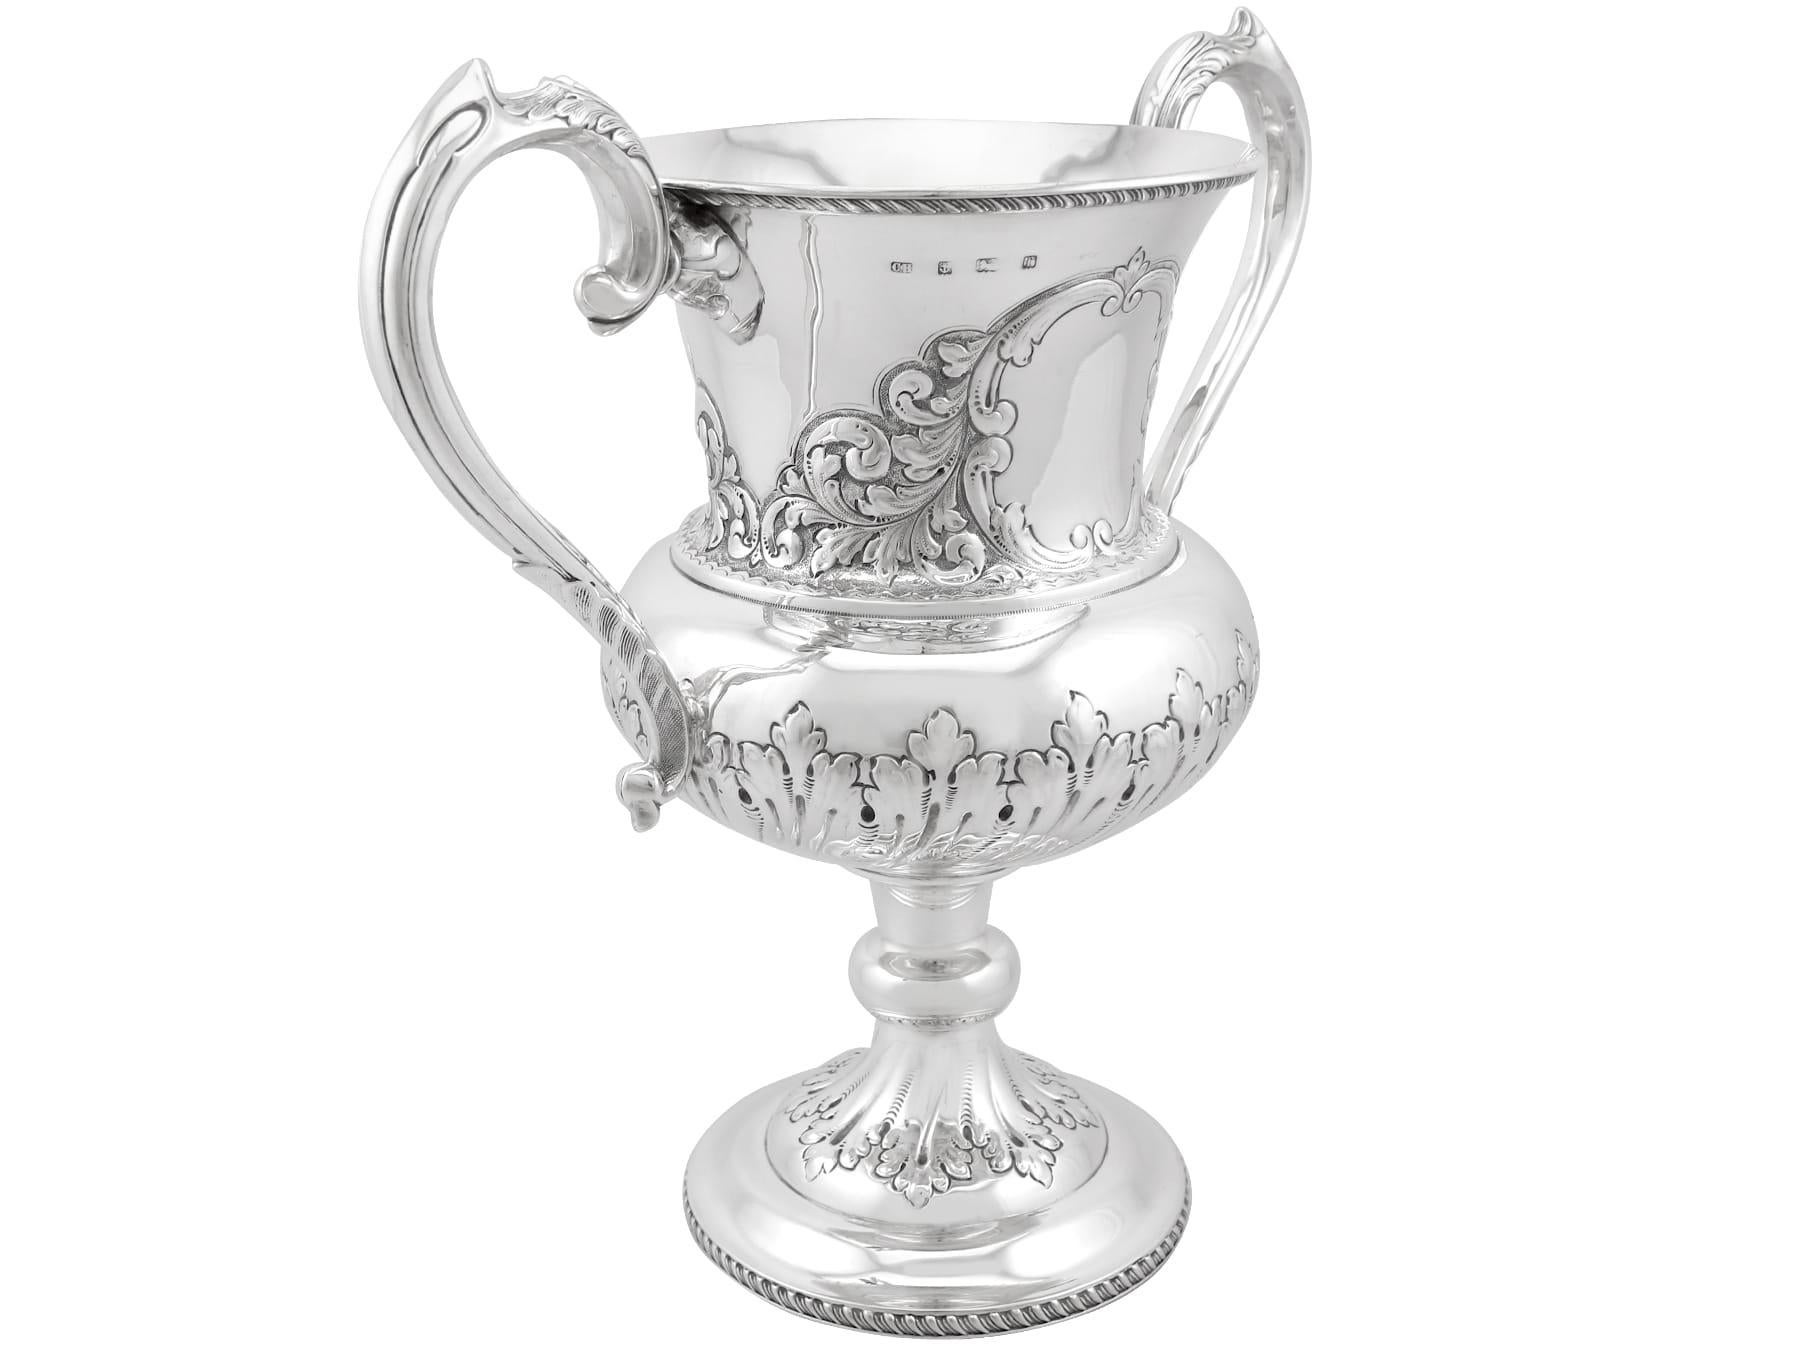 An exceptional, fine and impressive antique Edwardian English sterling silver presentation cup; an addition to our presentation silverware collection.

This exceptional Edwardian sterling silver presentation cup has a Campania form onto a knopped